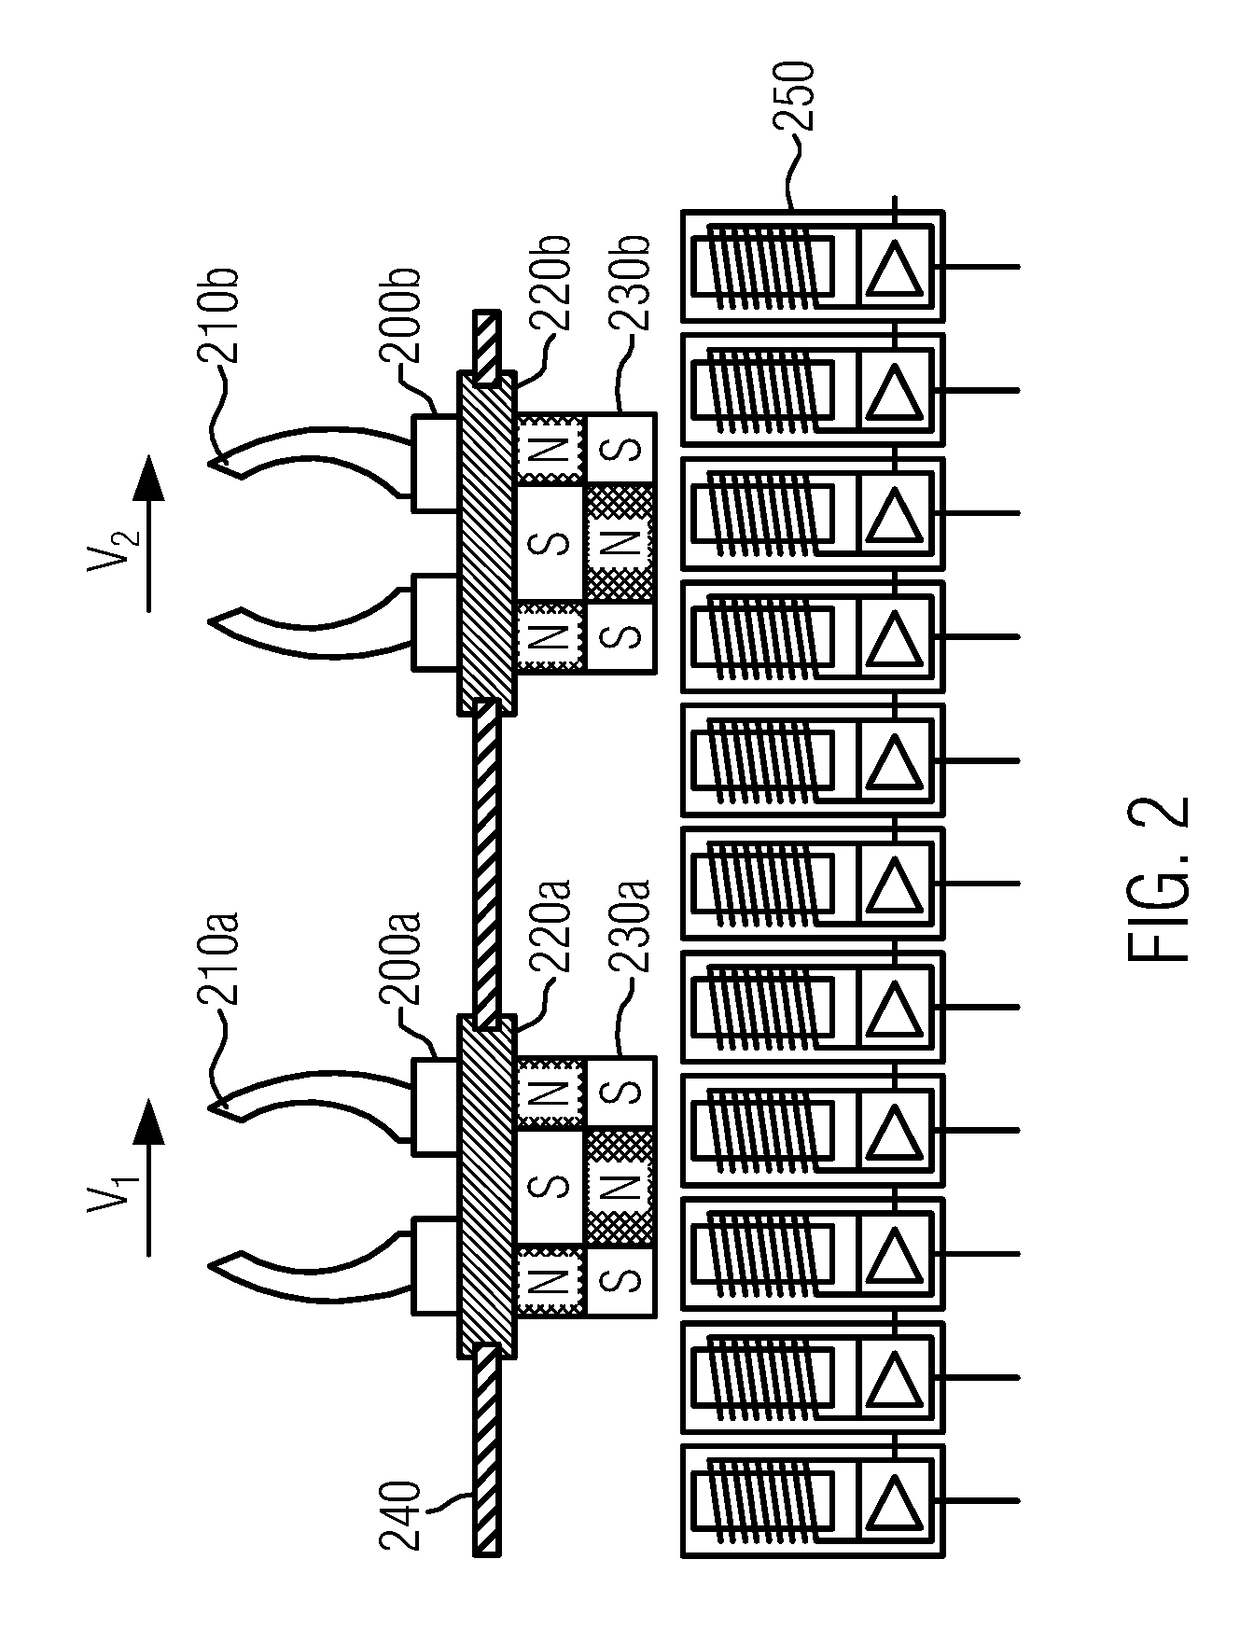 Device and method for transporting containers in a container treatment system